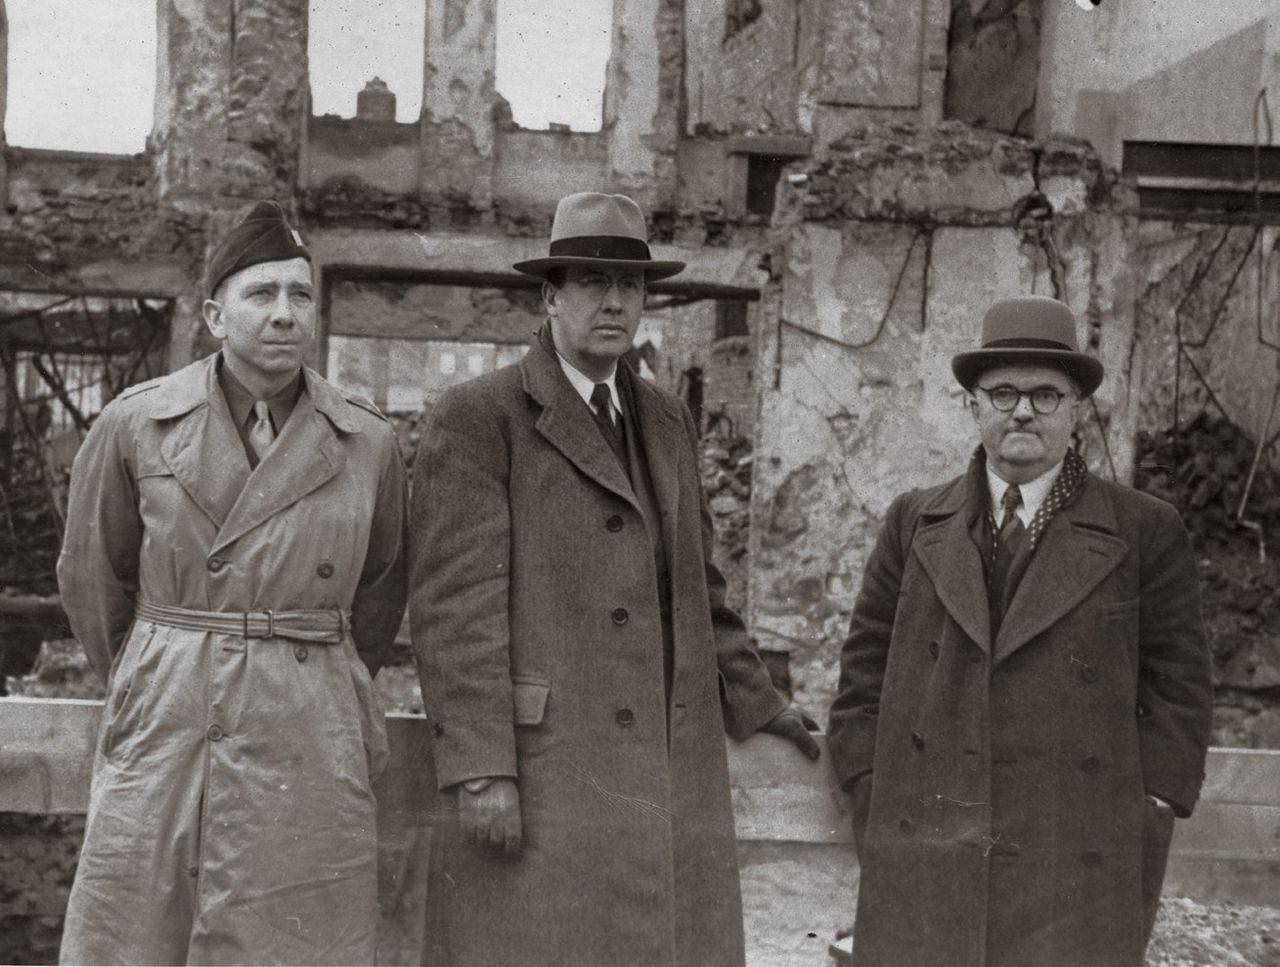 Elder Benson standing with his companions during his mission in Europe, around 1946. Teachings of Presidents of the Church: Ezra Taft Benson (2014), 56